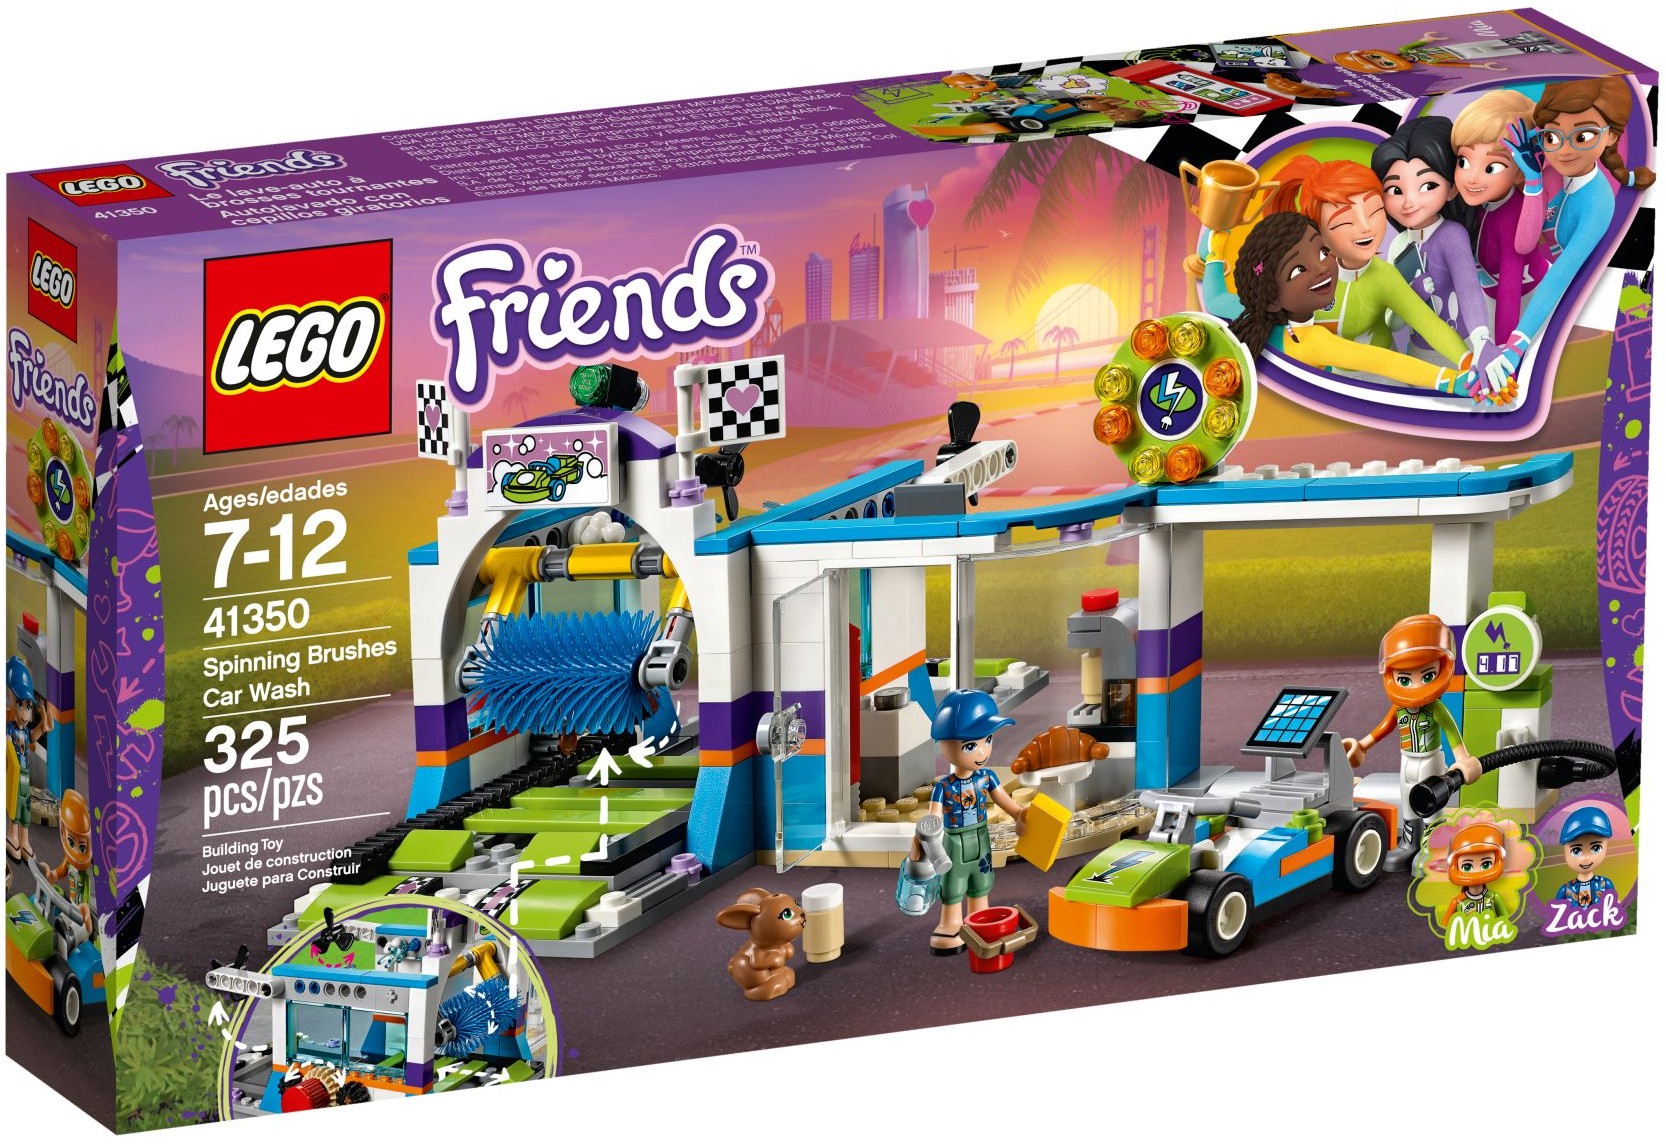 new lego friends sets 2018